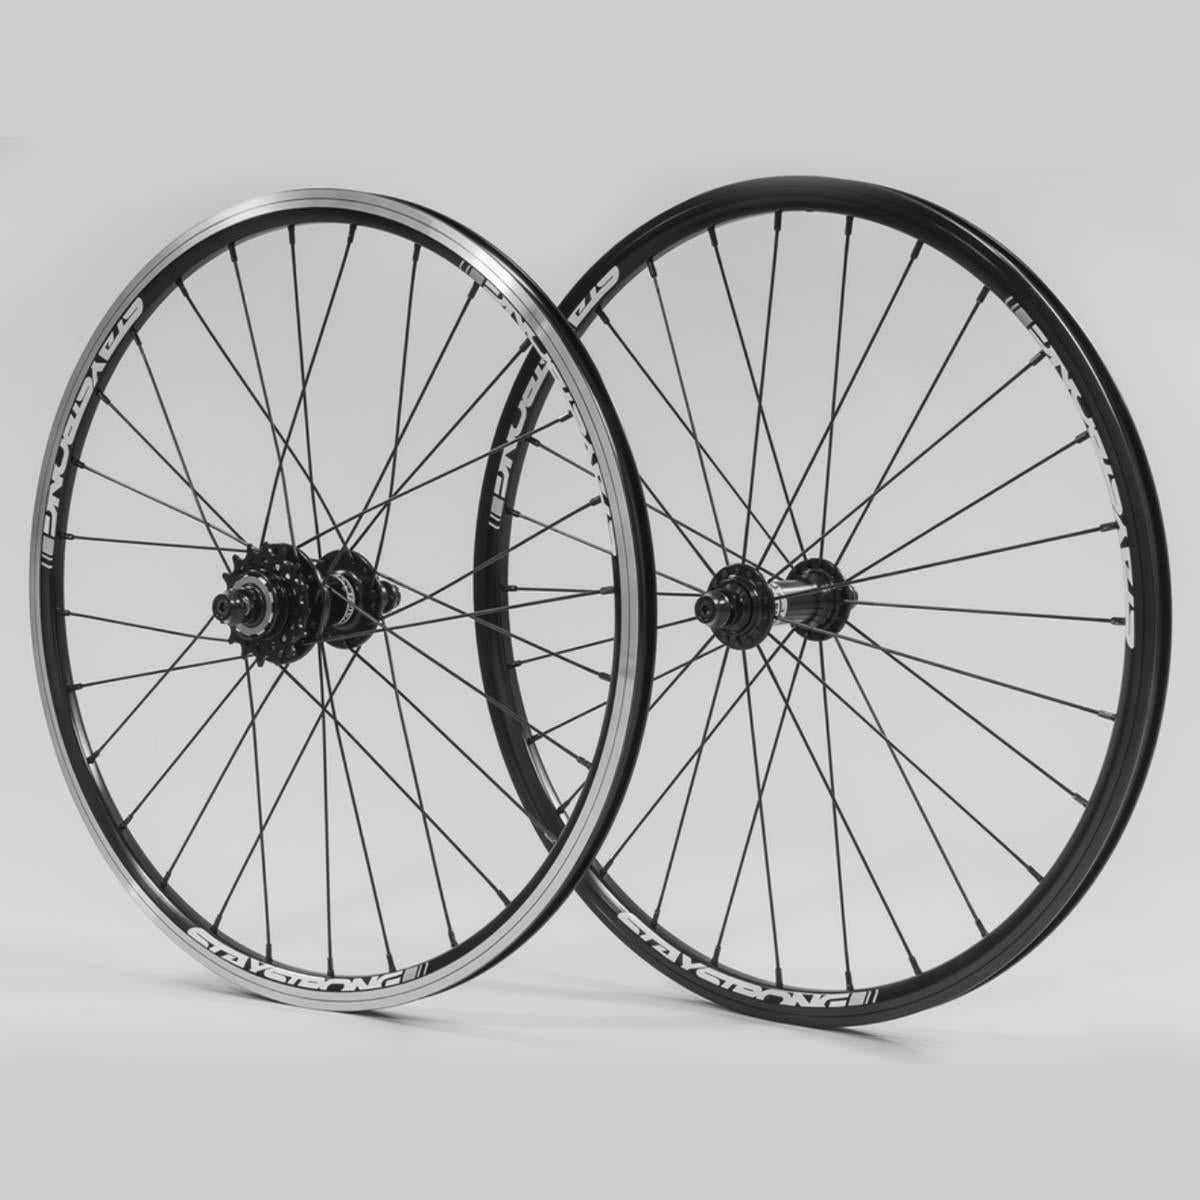 Stay Strong Reactiv Race 20" 1.1-1/8"" Wheelset